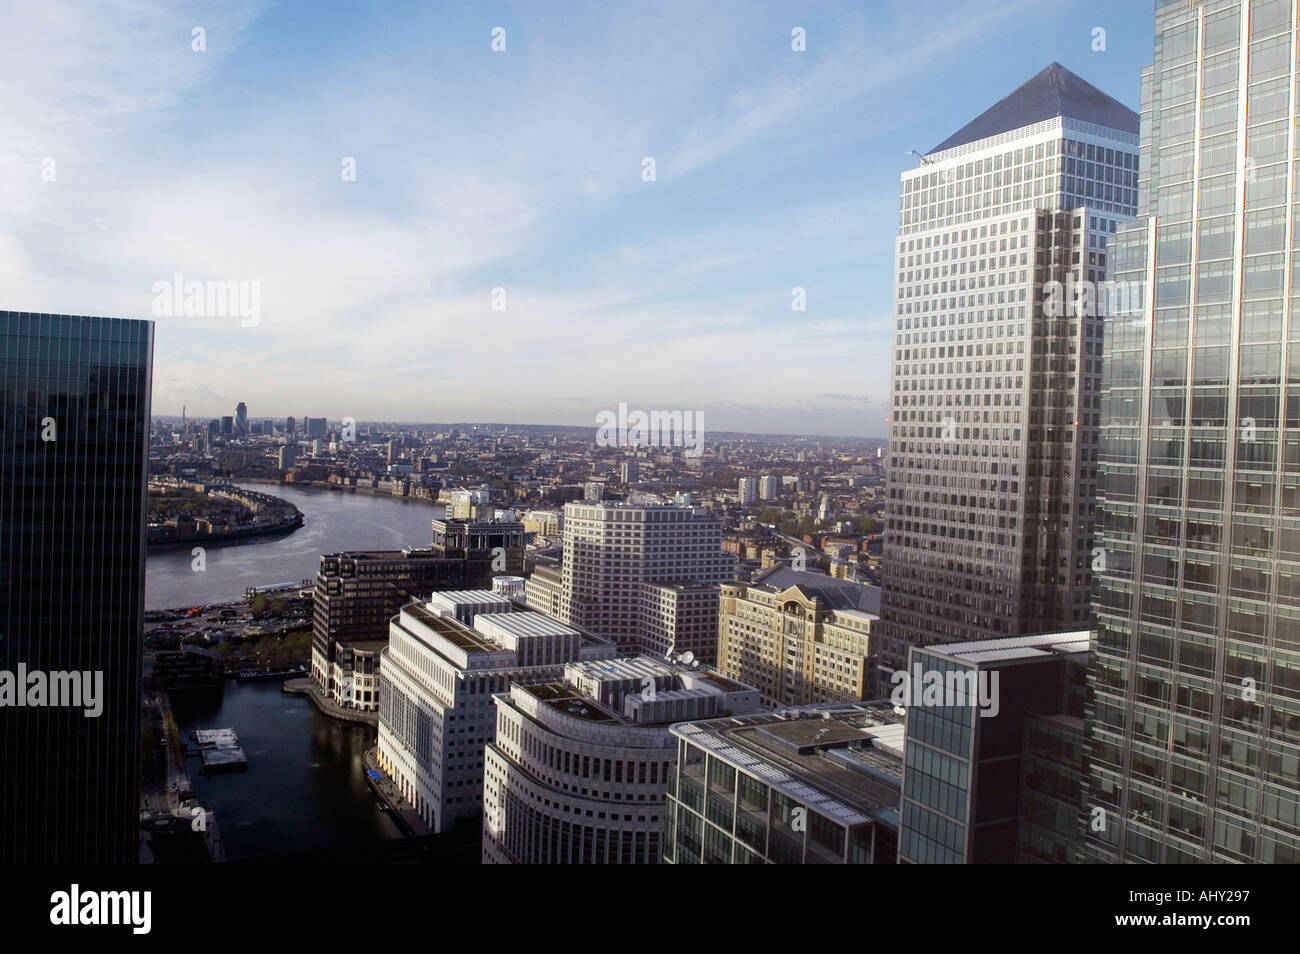 View From The Top Floor Of 1 Of The Buildings In Canary Wharf